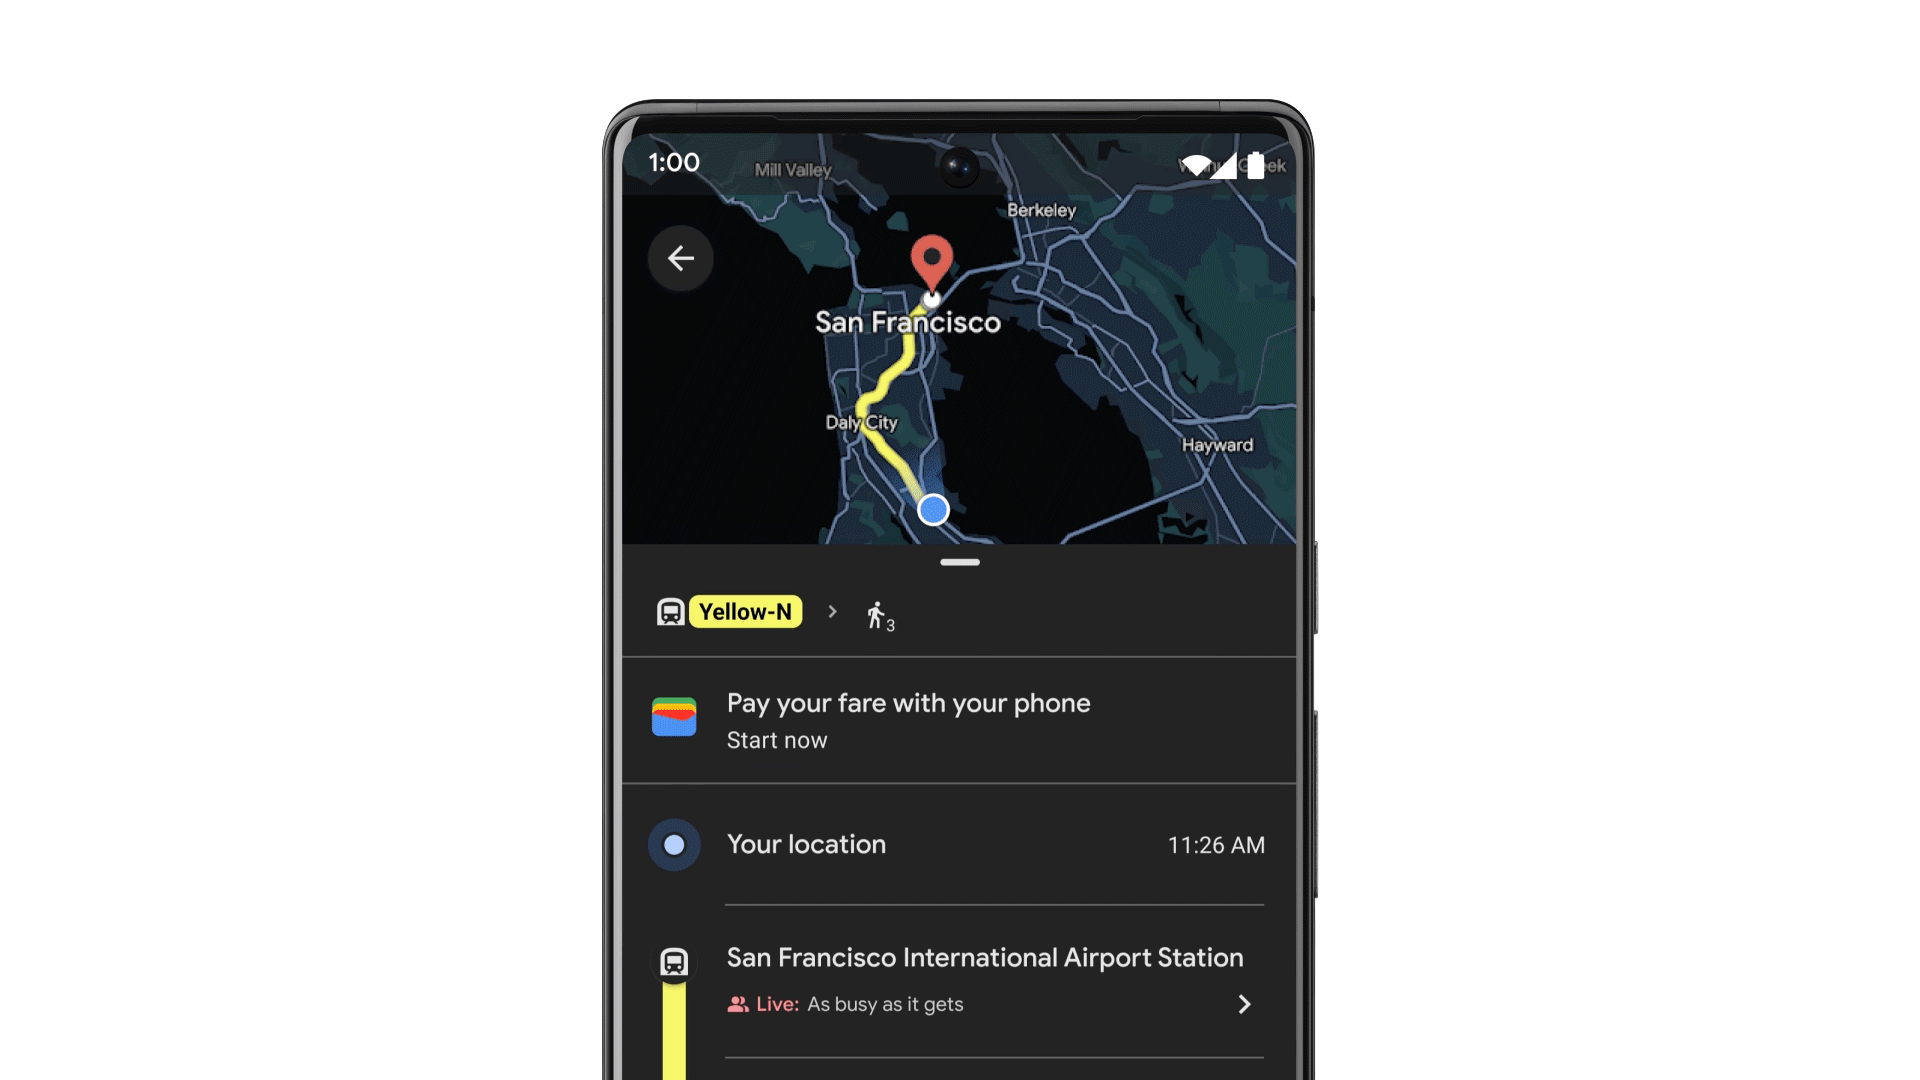 A user looks at their phone for directions from the San Francisco airport on Google Maps. Since they are looking for public transportation routes, they are prompted on their phone to add fare to their Clipper card, a transit card used throughout the San Francisco Bay Area. With a tap, they add their desired amount of money to the card.